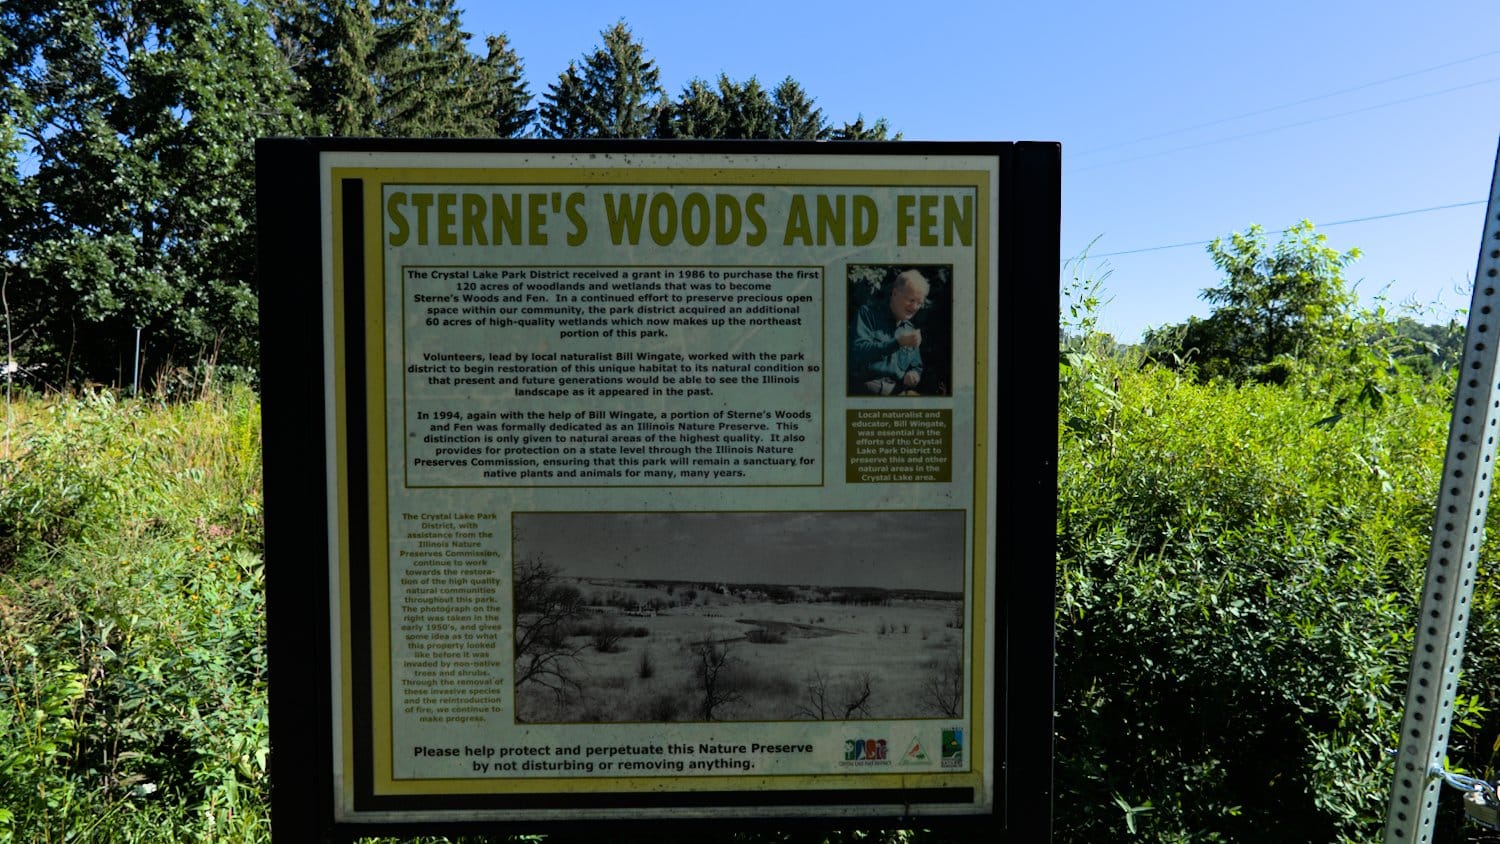 Sterne's Woods and Fen historical sign.